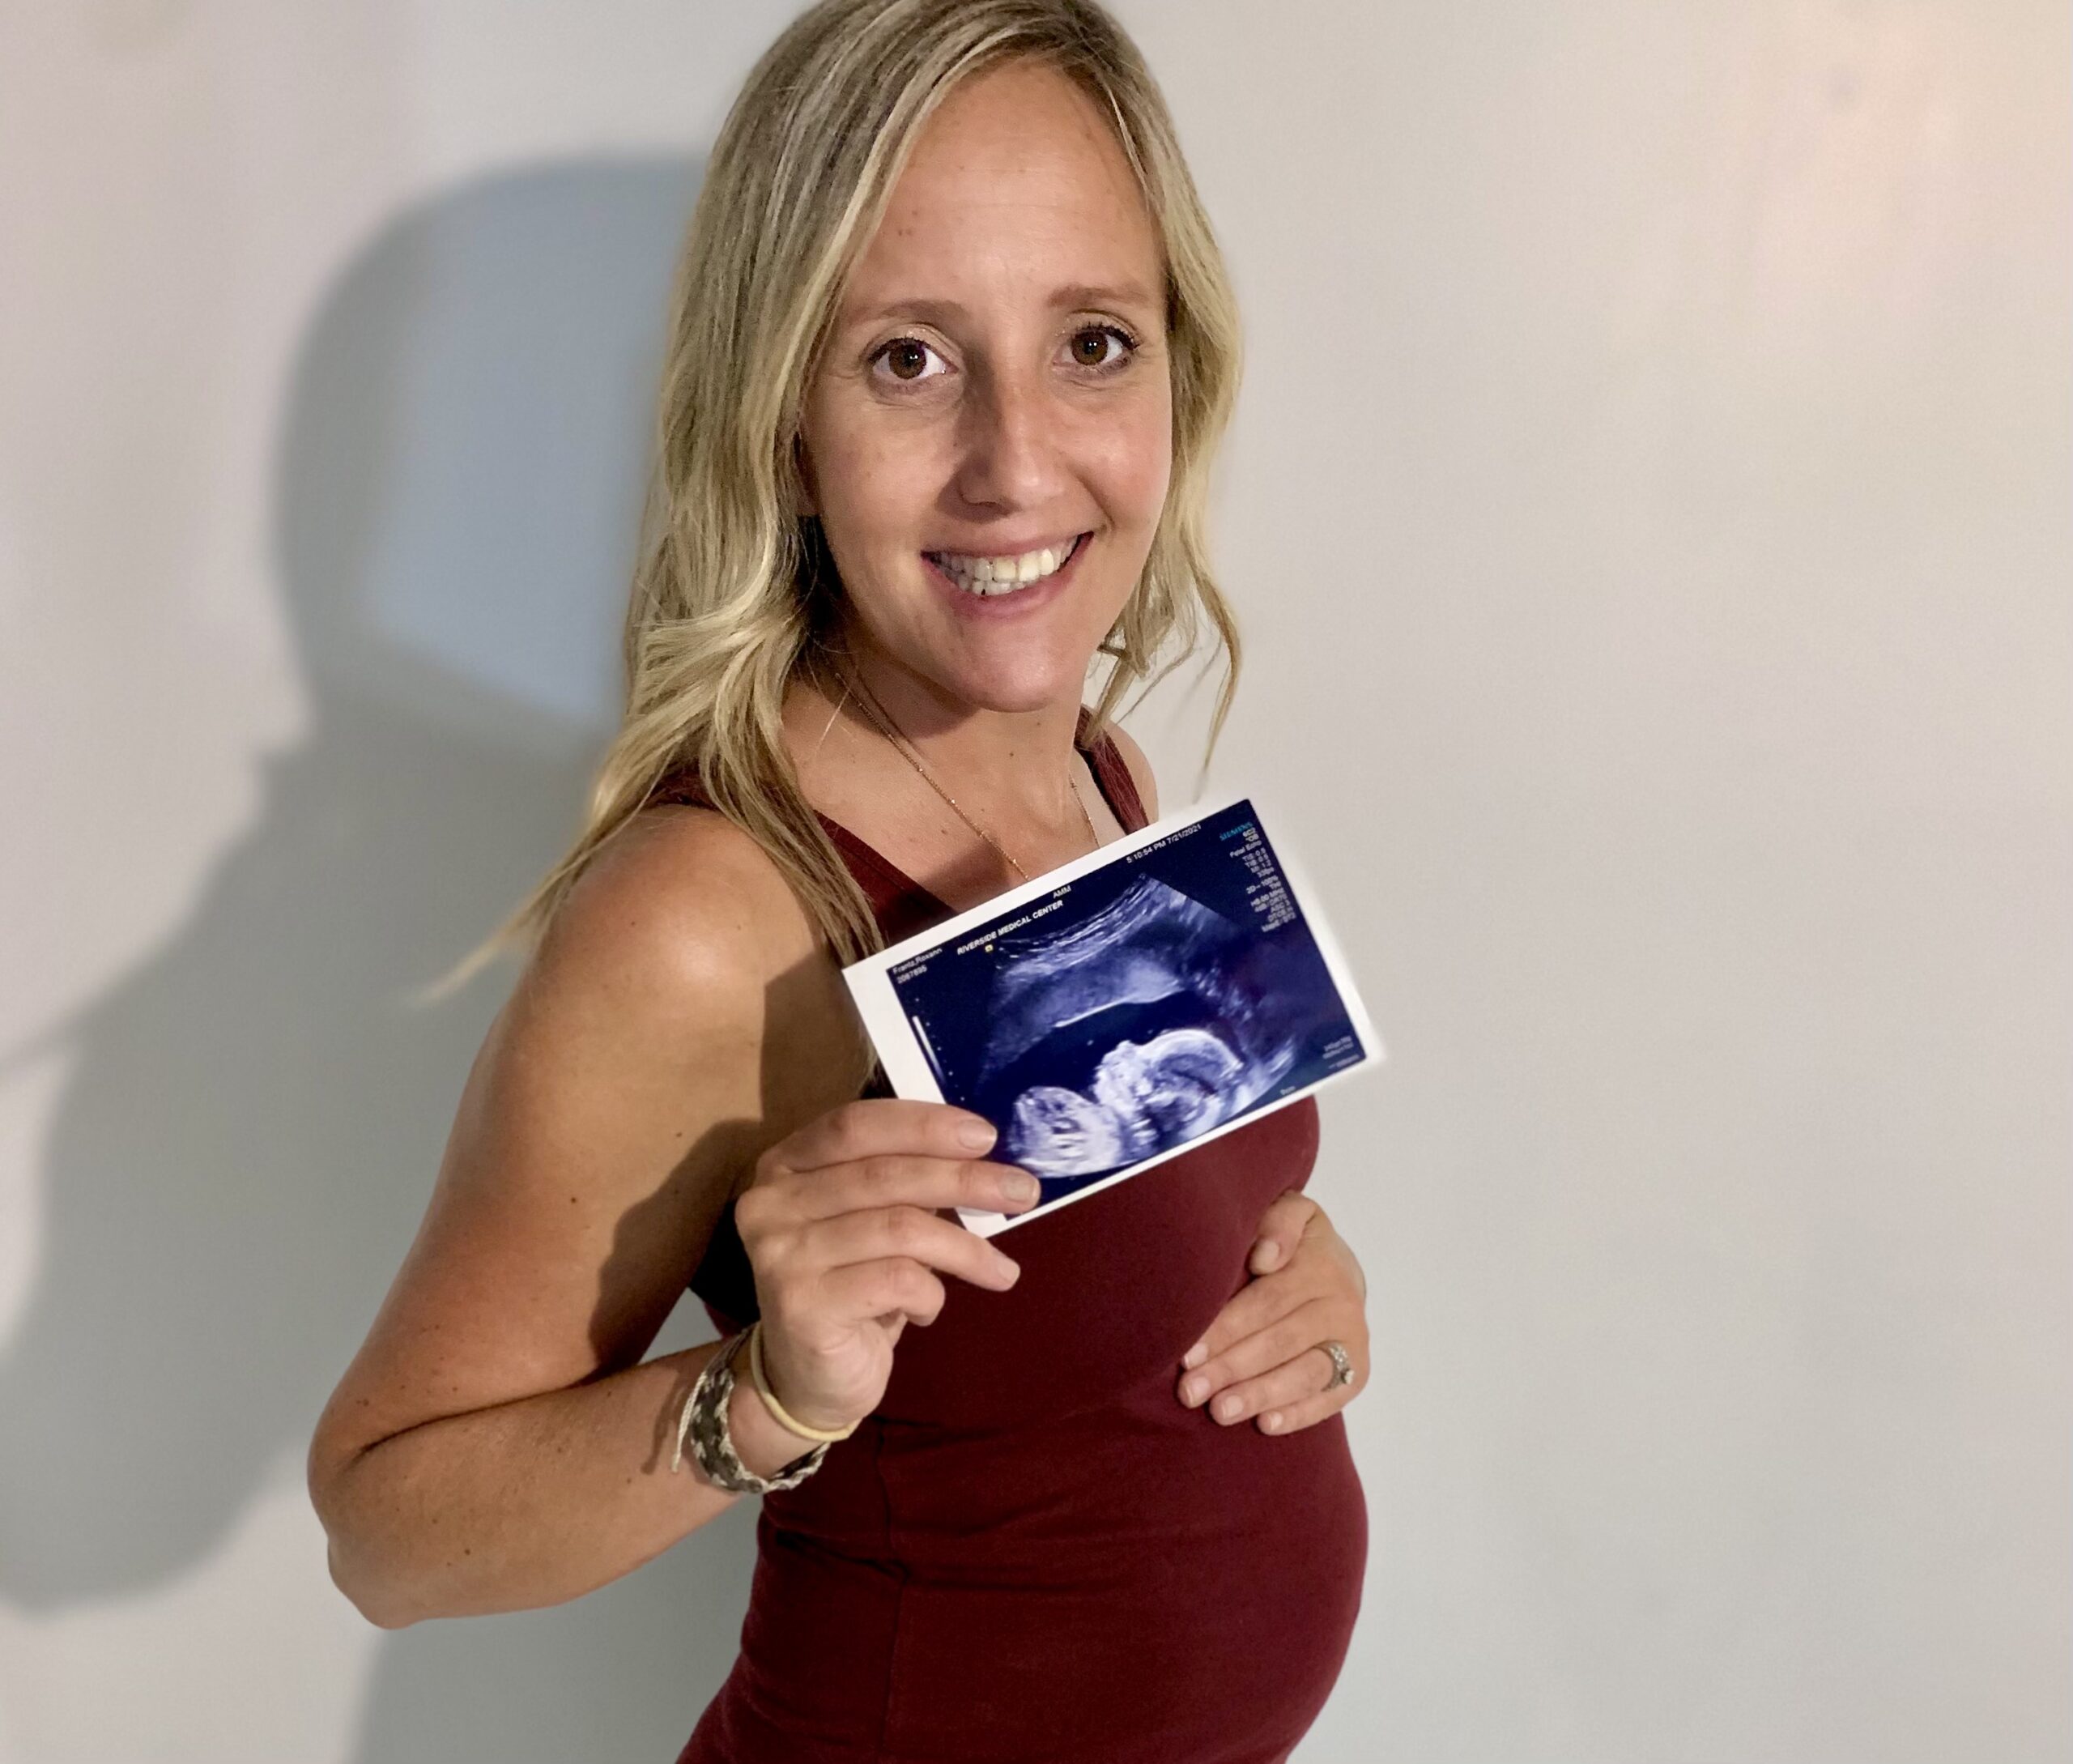 Smiling pregnant mom holding her belly and an ultrasound photo.